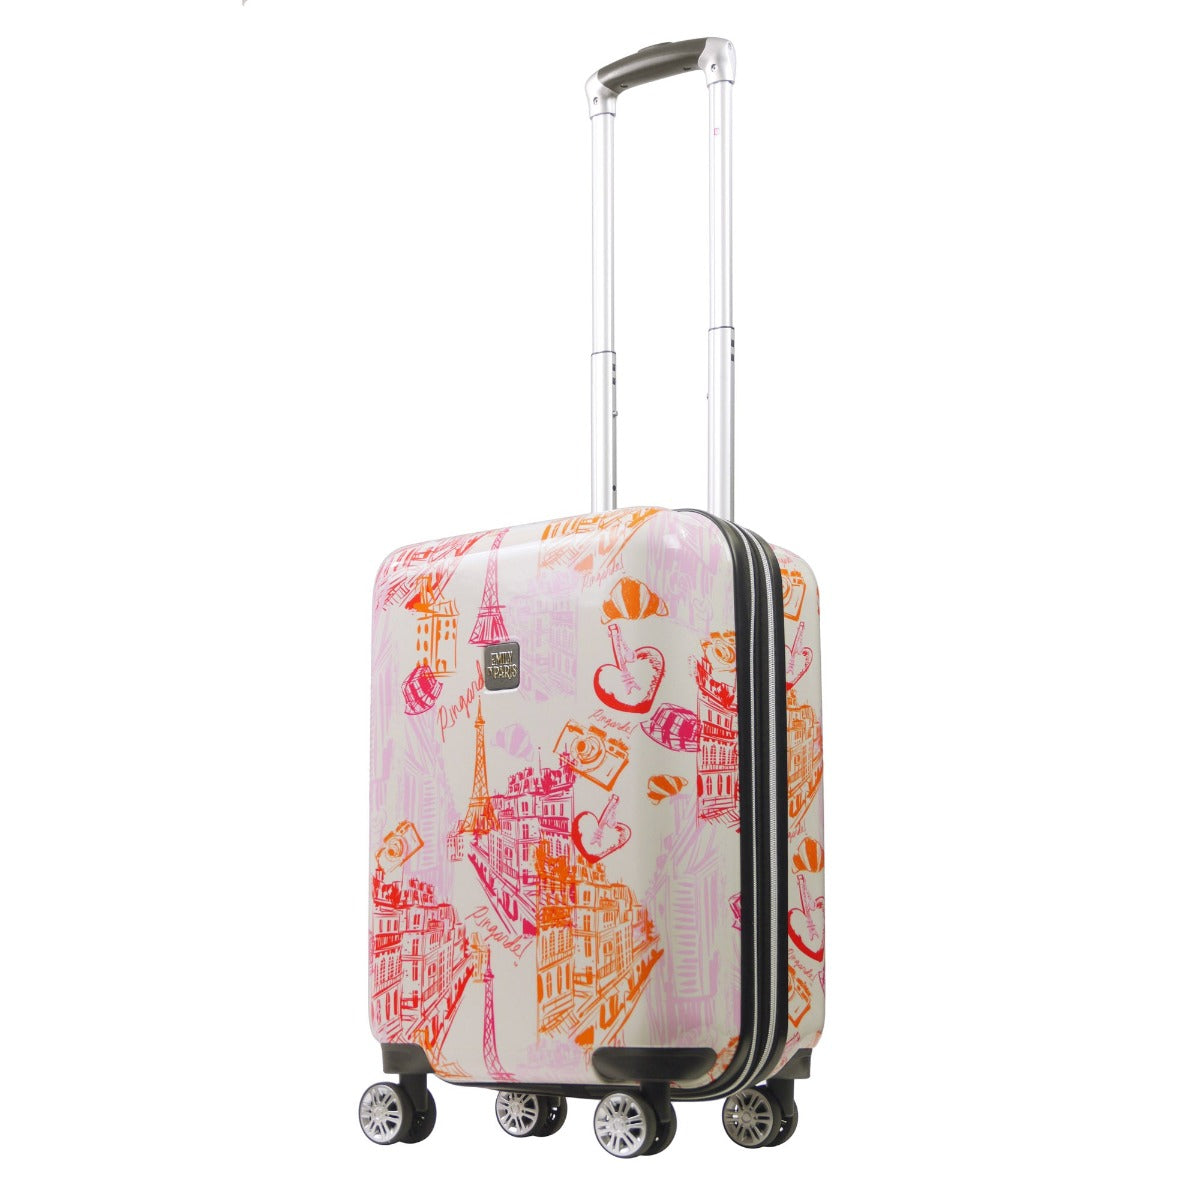 Ful Emily in Paris 21.5" hardside expandable luggage - best carry on lightweight spinner suitcase for travel